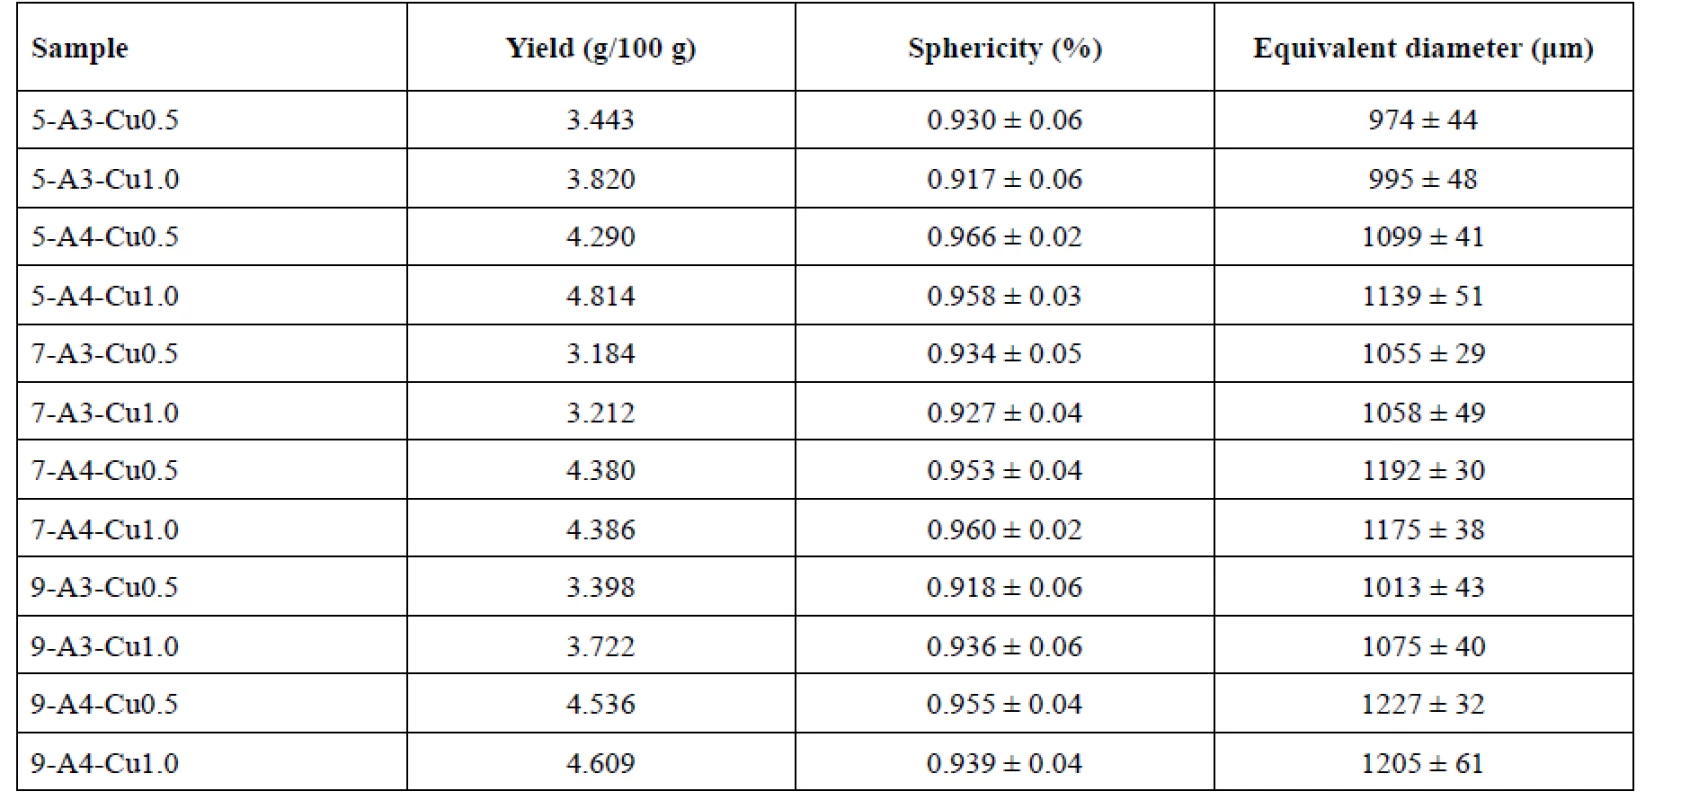 Yield, sphericity factor and equivalent diameter results